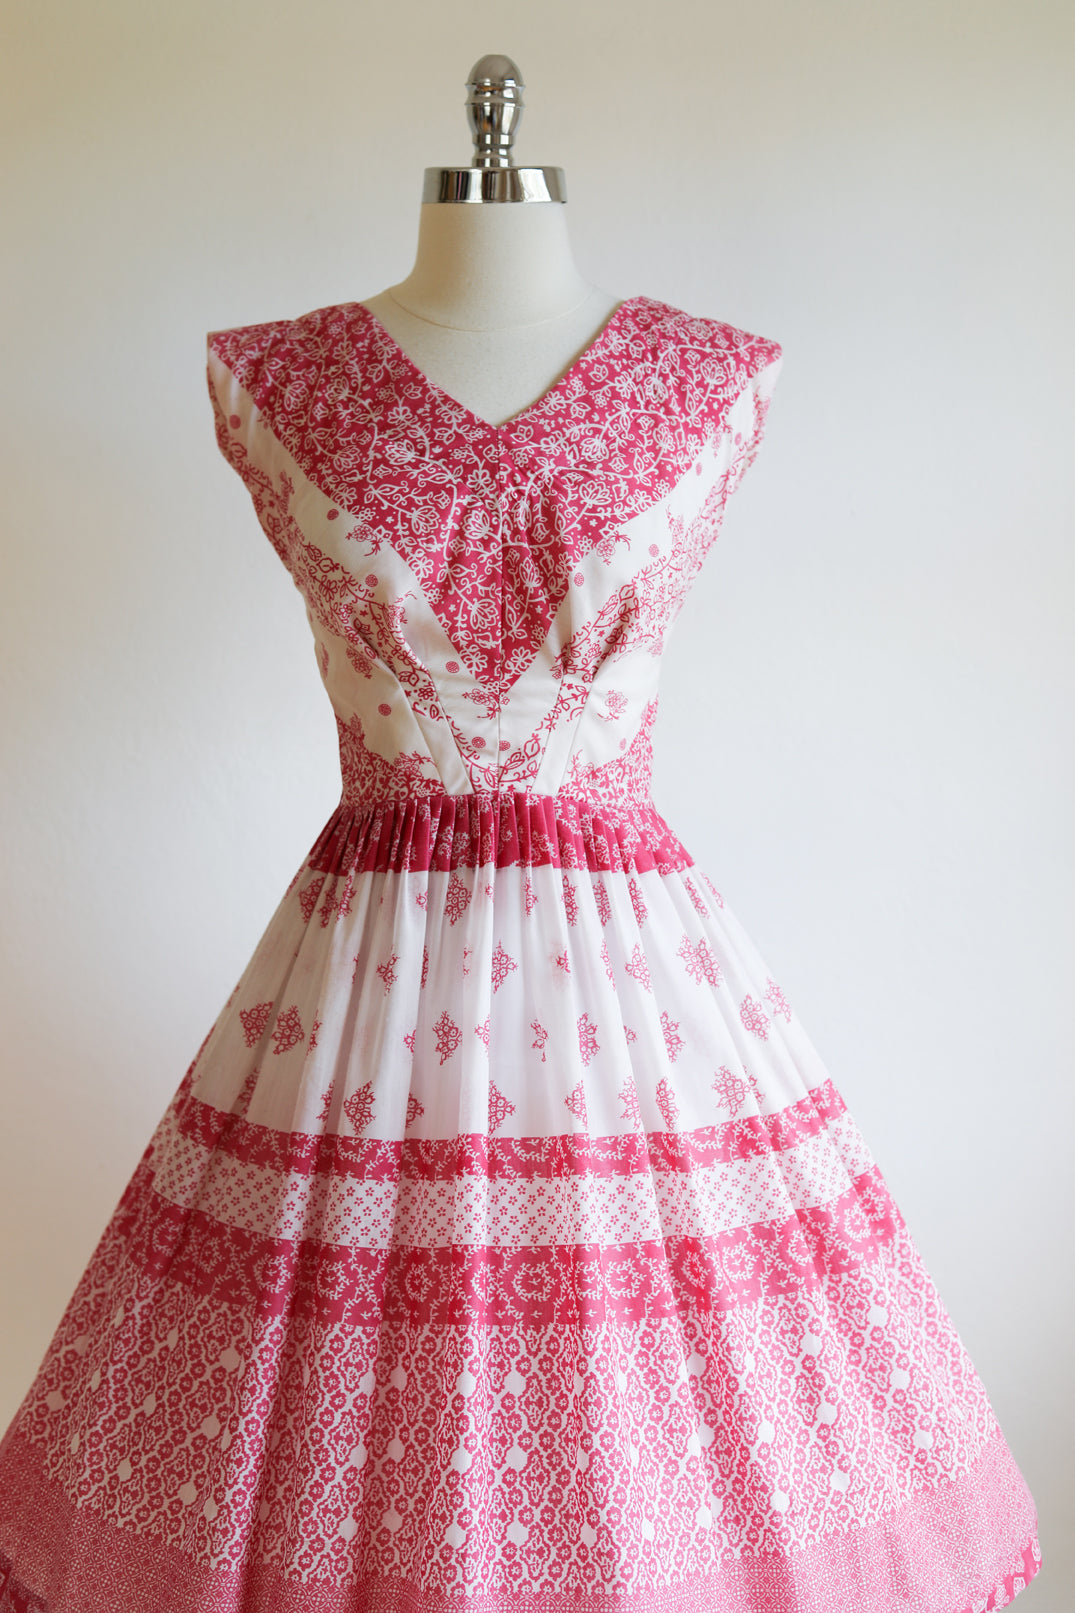 Vintage 1950s Dress - SUPER CUTE Candy Pink + White Floral Border Print Jerry Gilden Cotton Voile Sundress Size XS to S